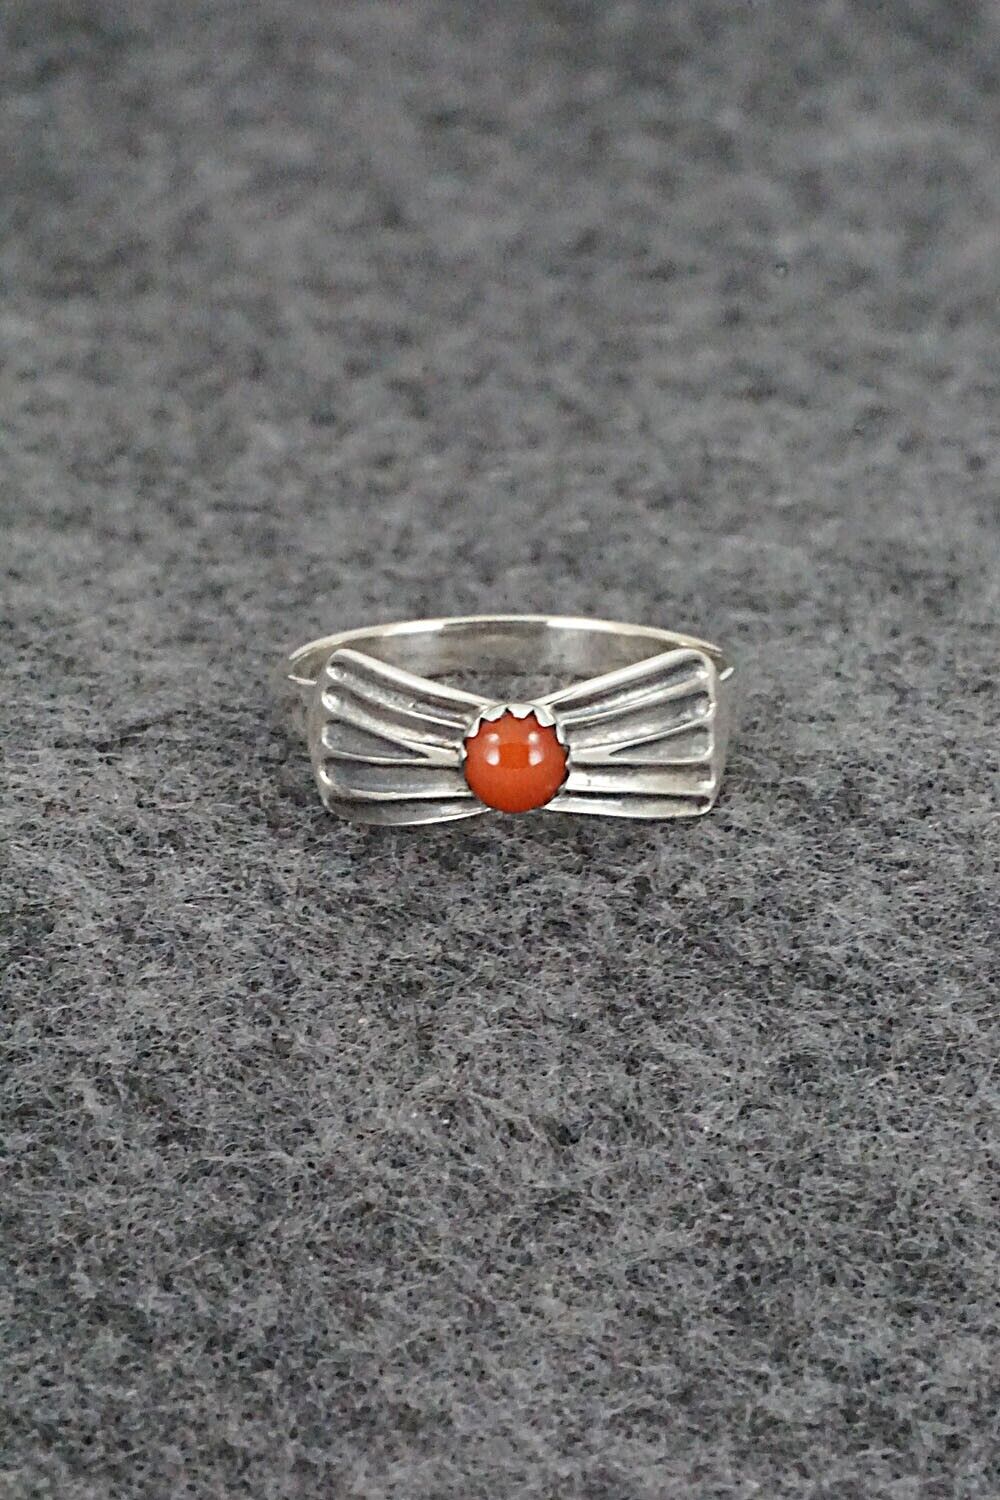 Coral and Sterling Silver Ring - Lee Shorty - Size 6.75